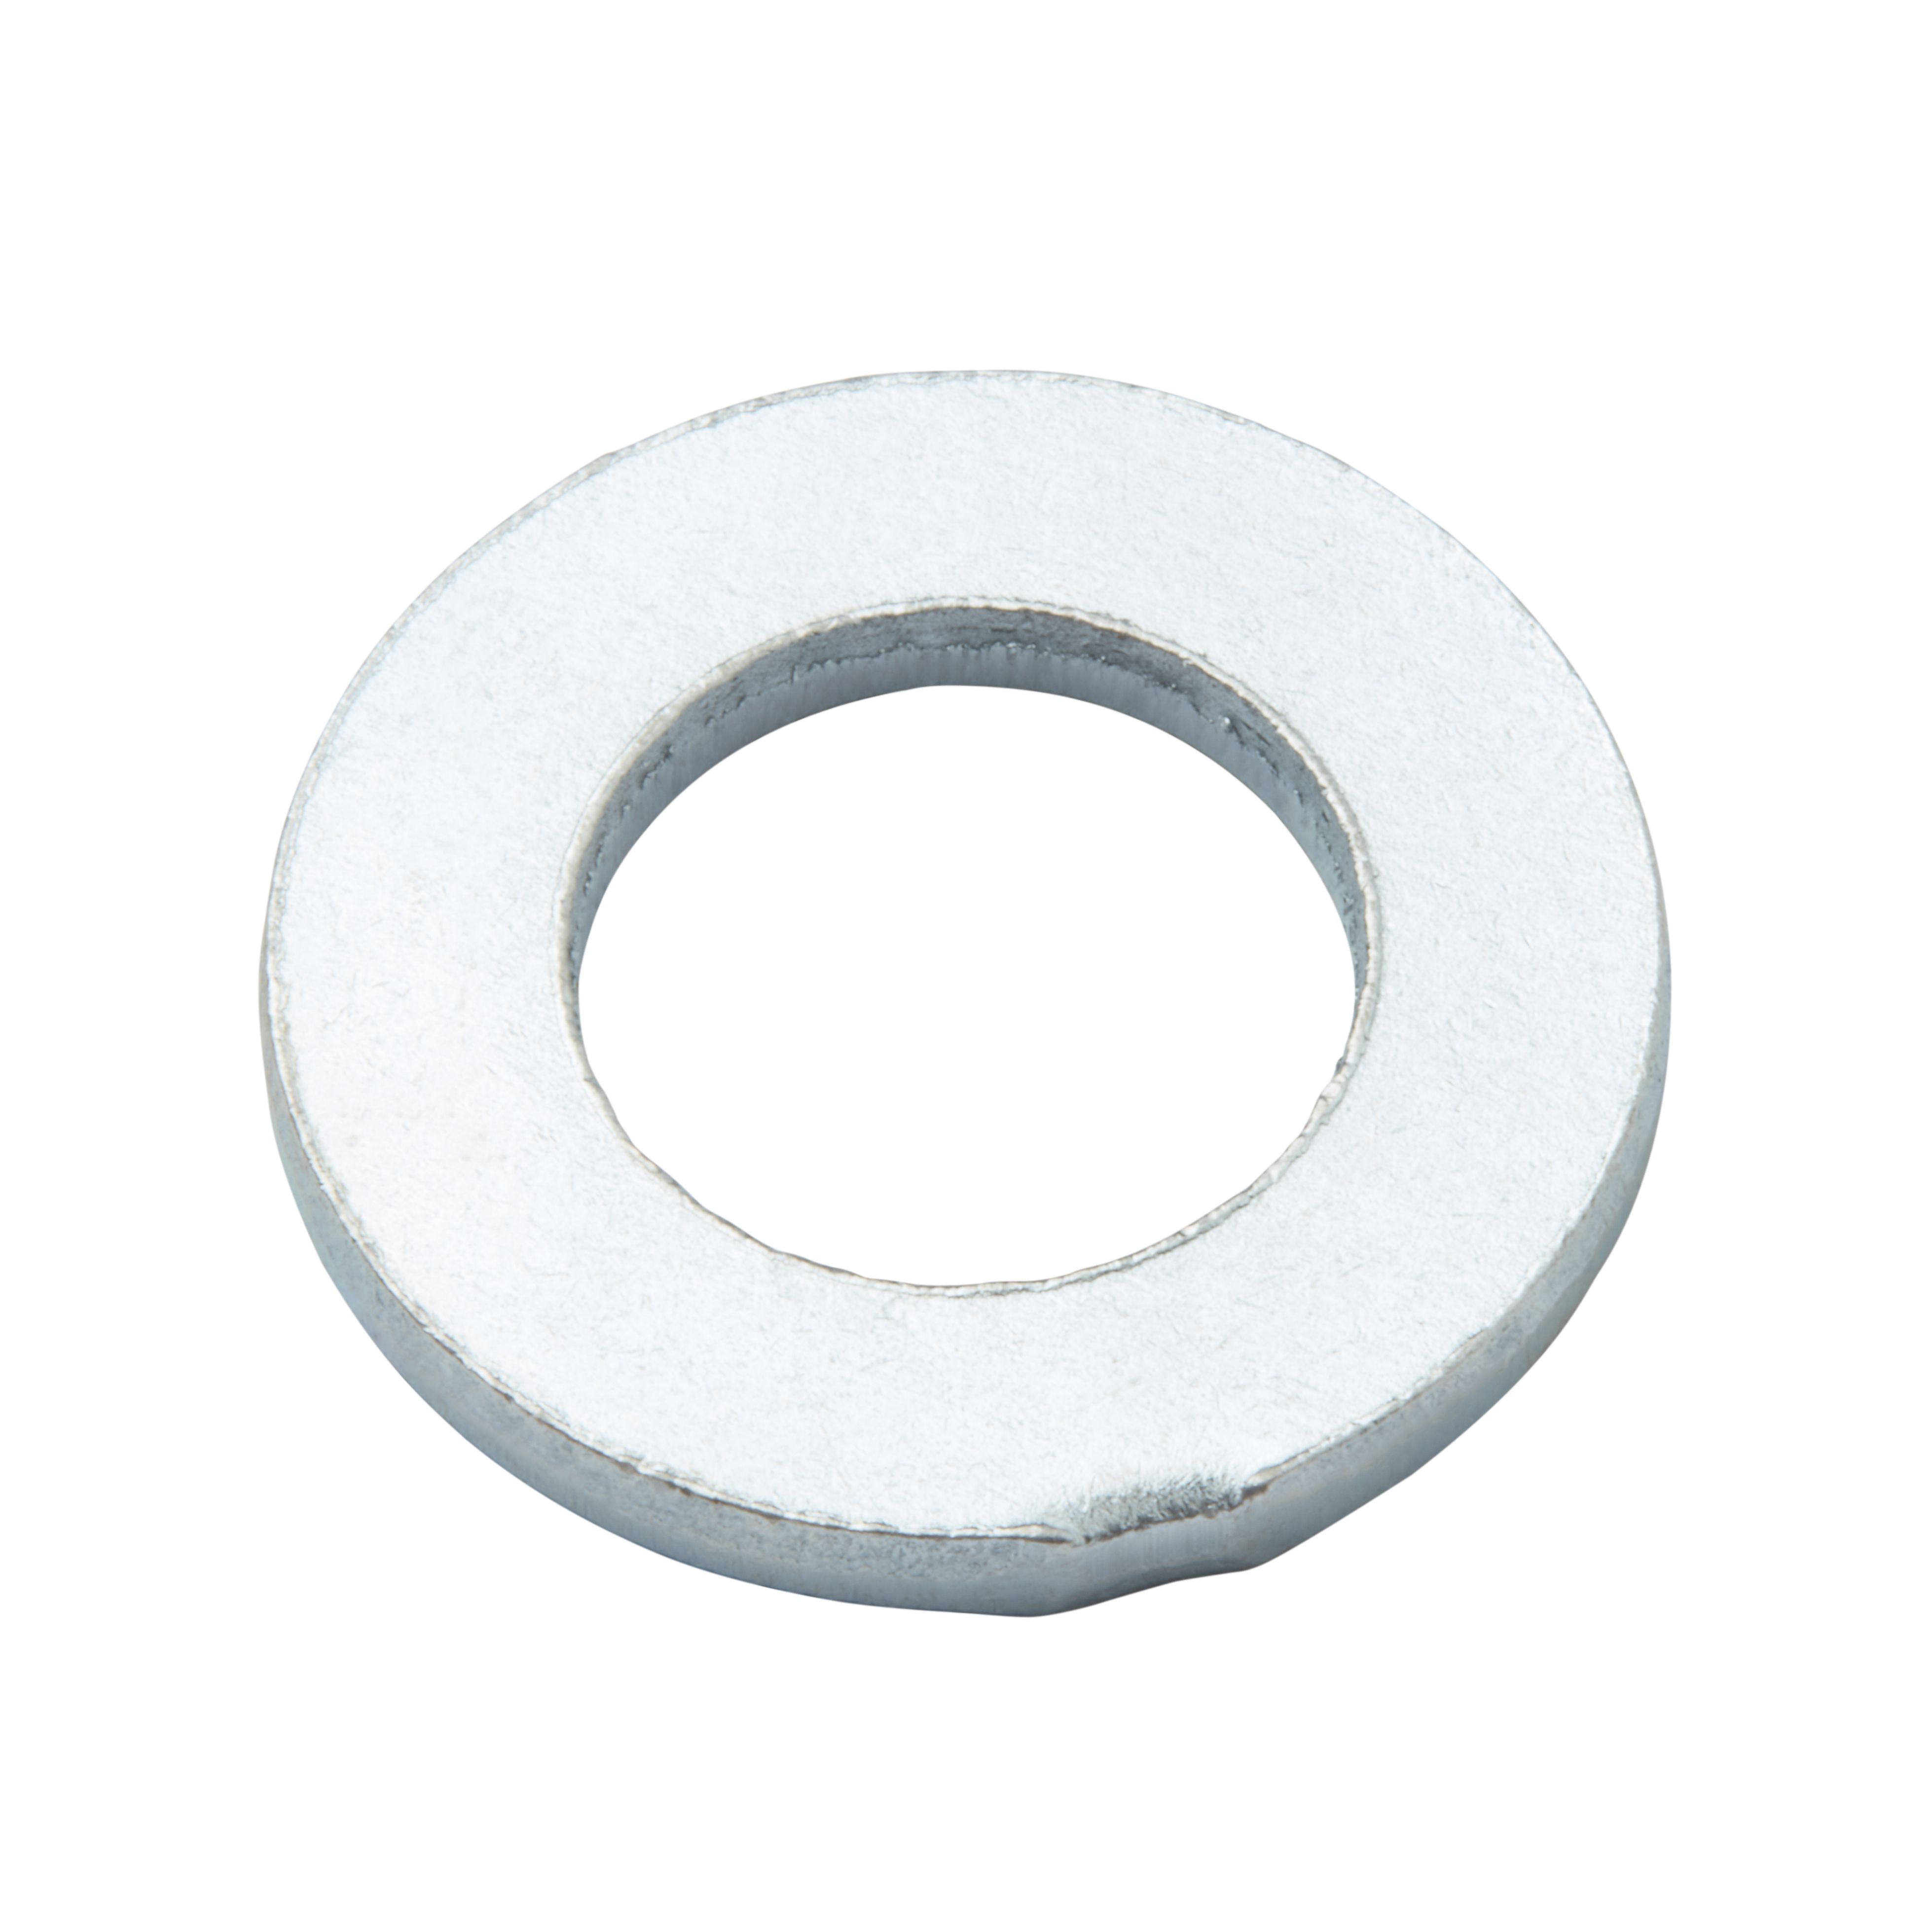 Diall M12 Carbon steel Flat Washer, (Dia)12mm, Pack of 20